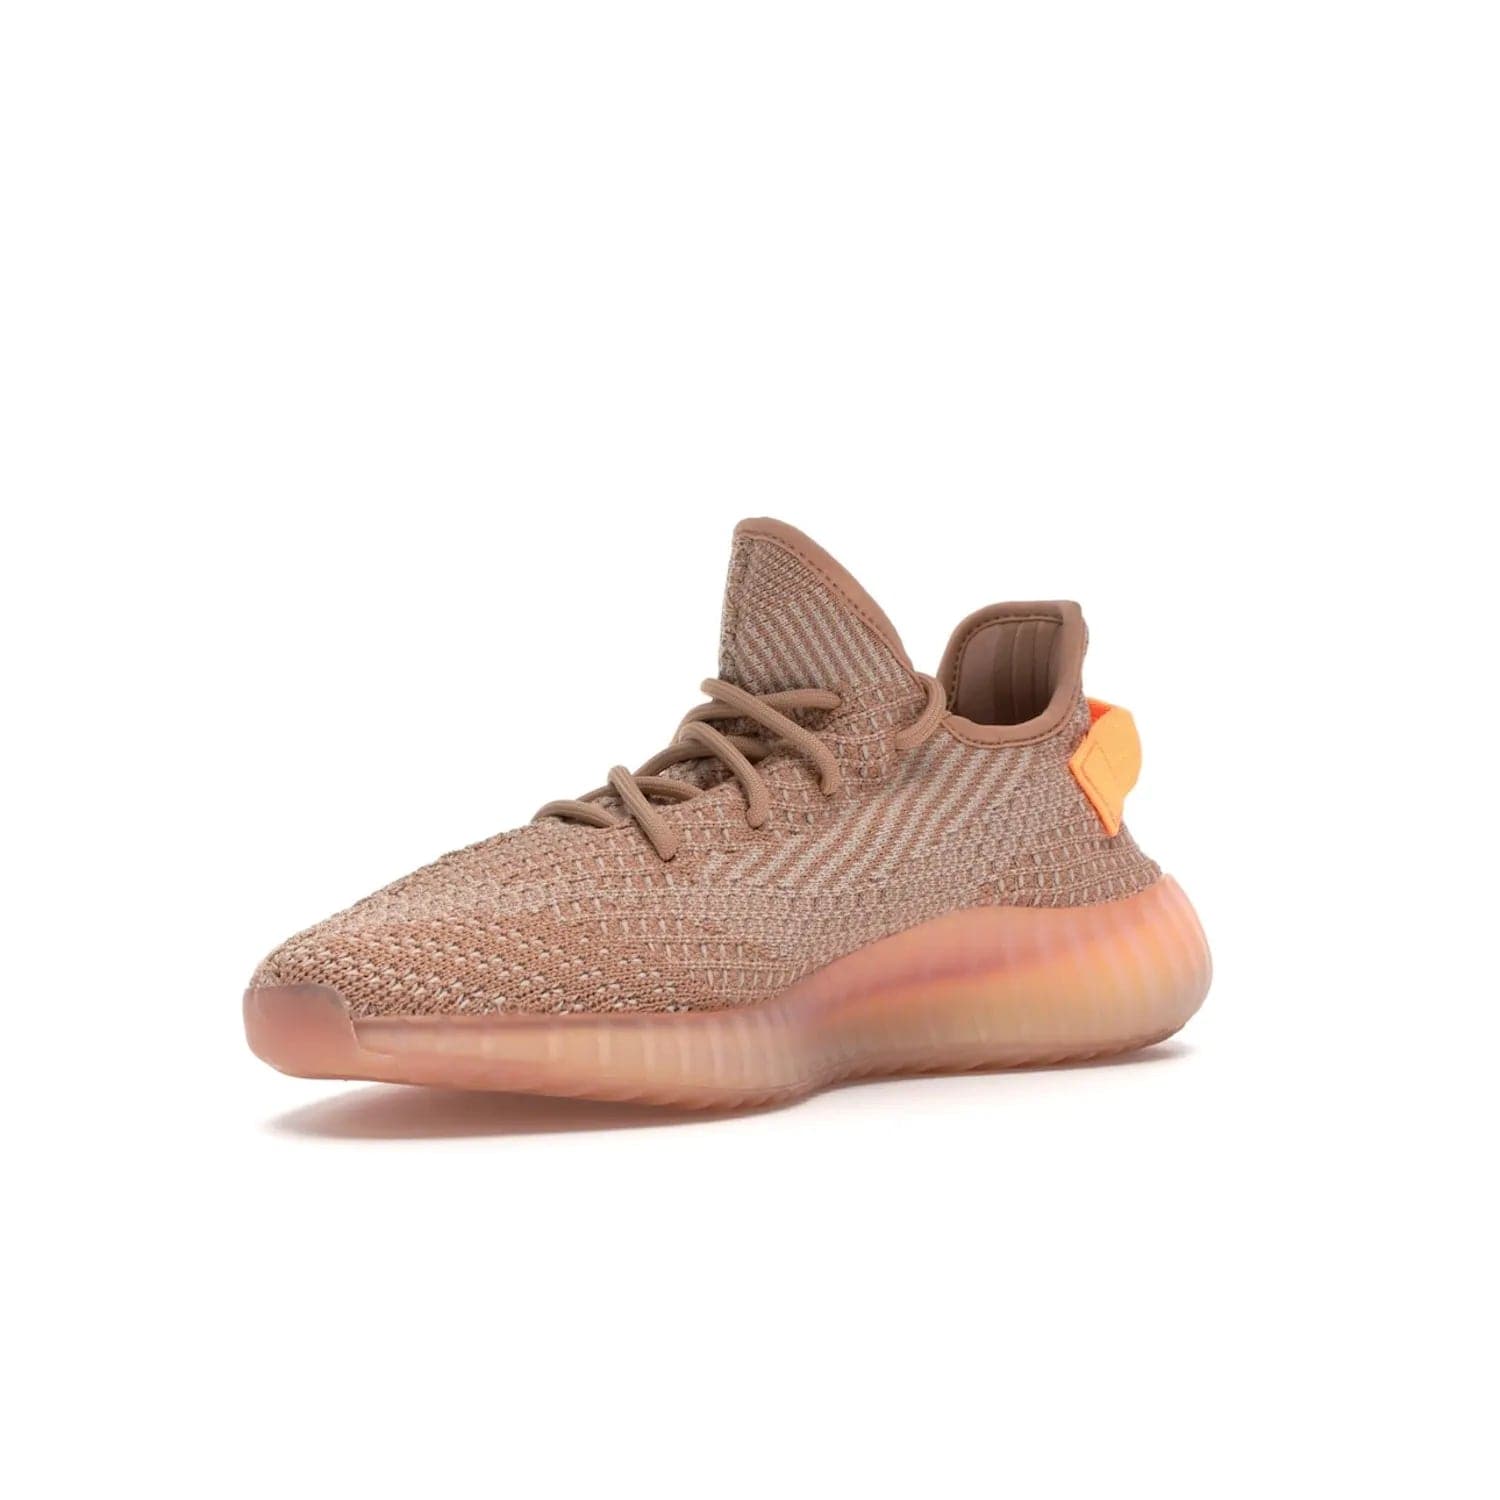 adidas Yeezy Boost 350 V2 Clay - Image 15 - Only at www.BallersClubKickz.com - The adidas Yeezy Boost 350 V2 Clay - style and swag in one shoe. Orange accents, clay midsole and sole. Get yours today!